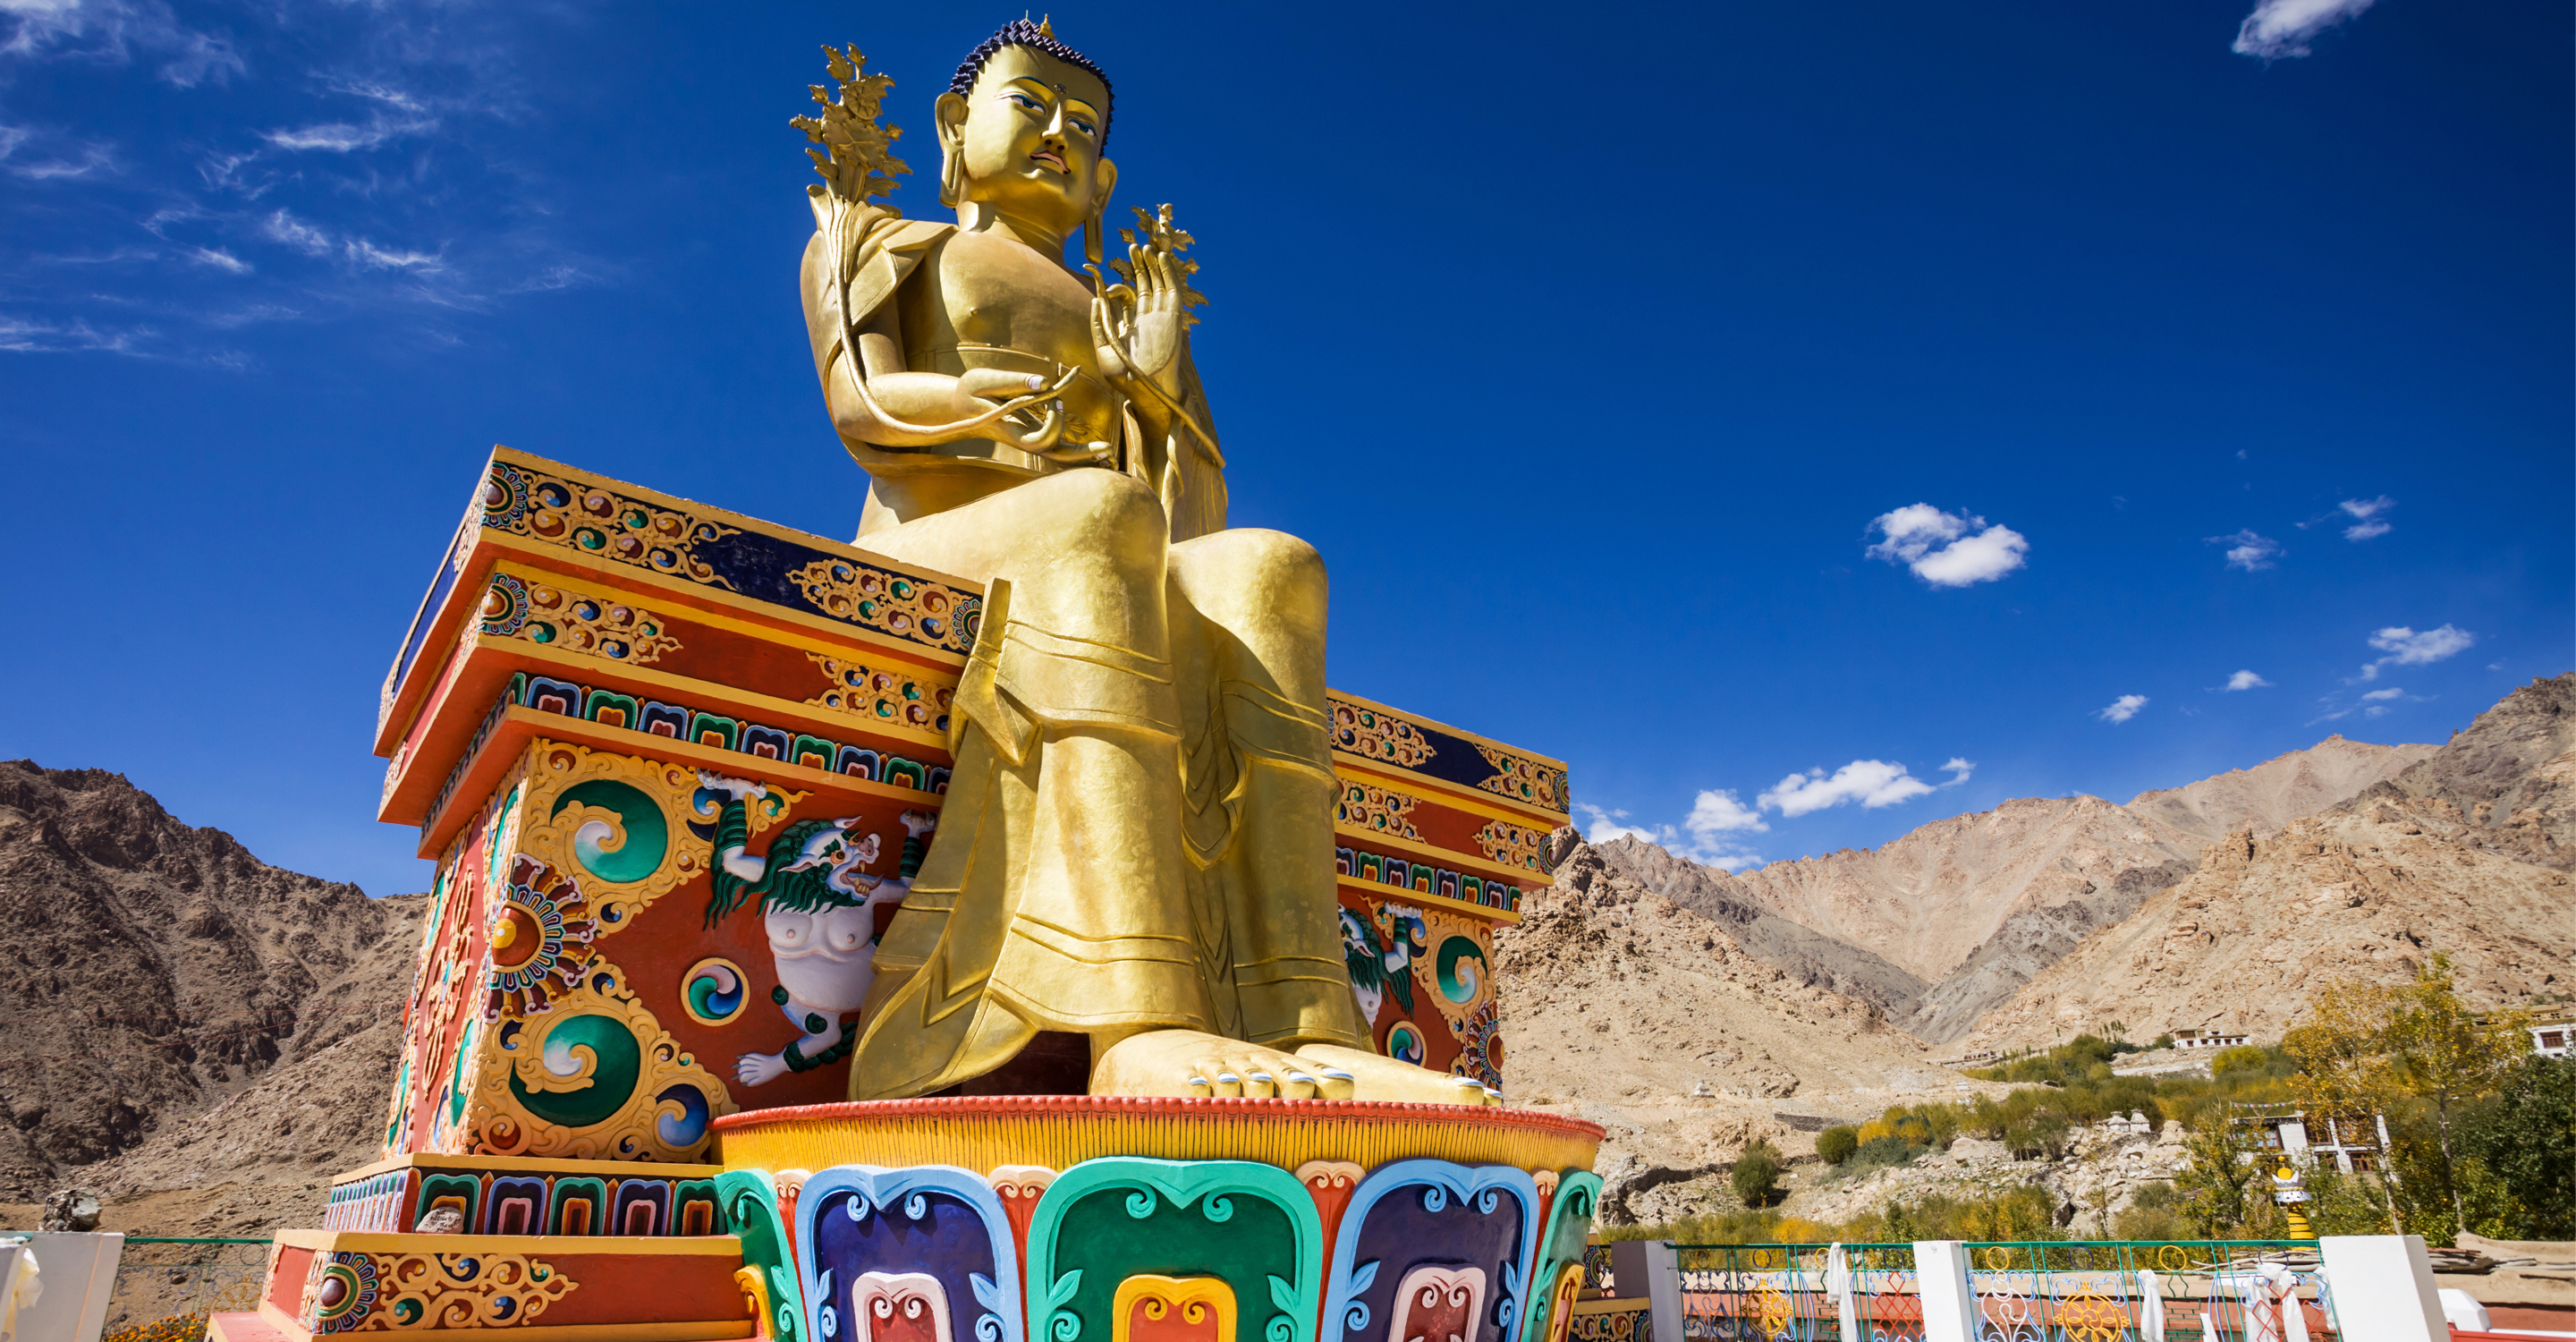 A large Buddhist statue at Likir Monastery in Ladakh, India